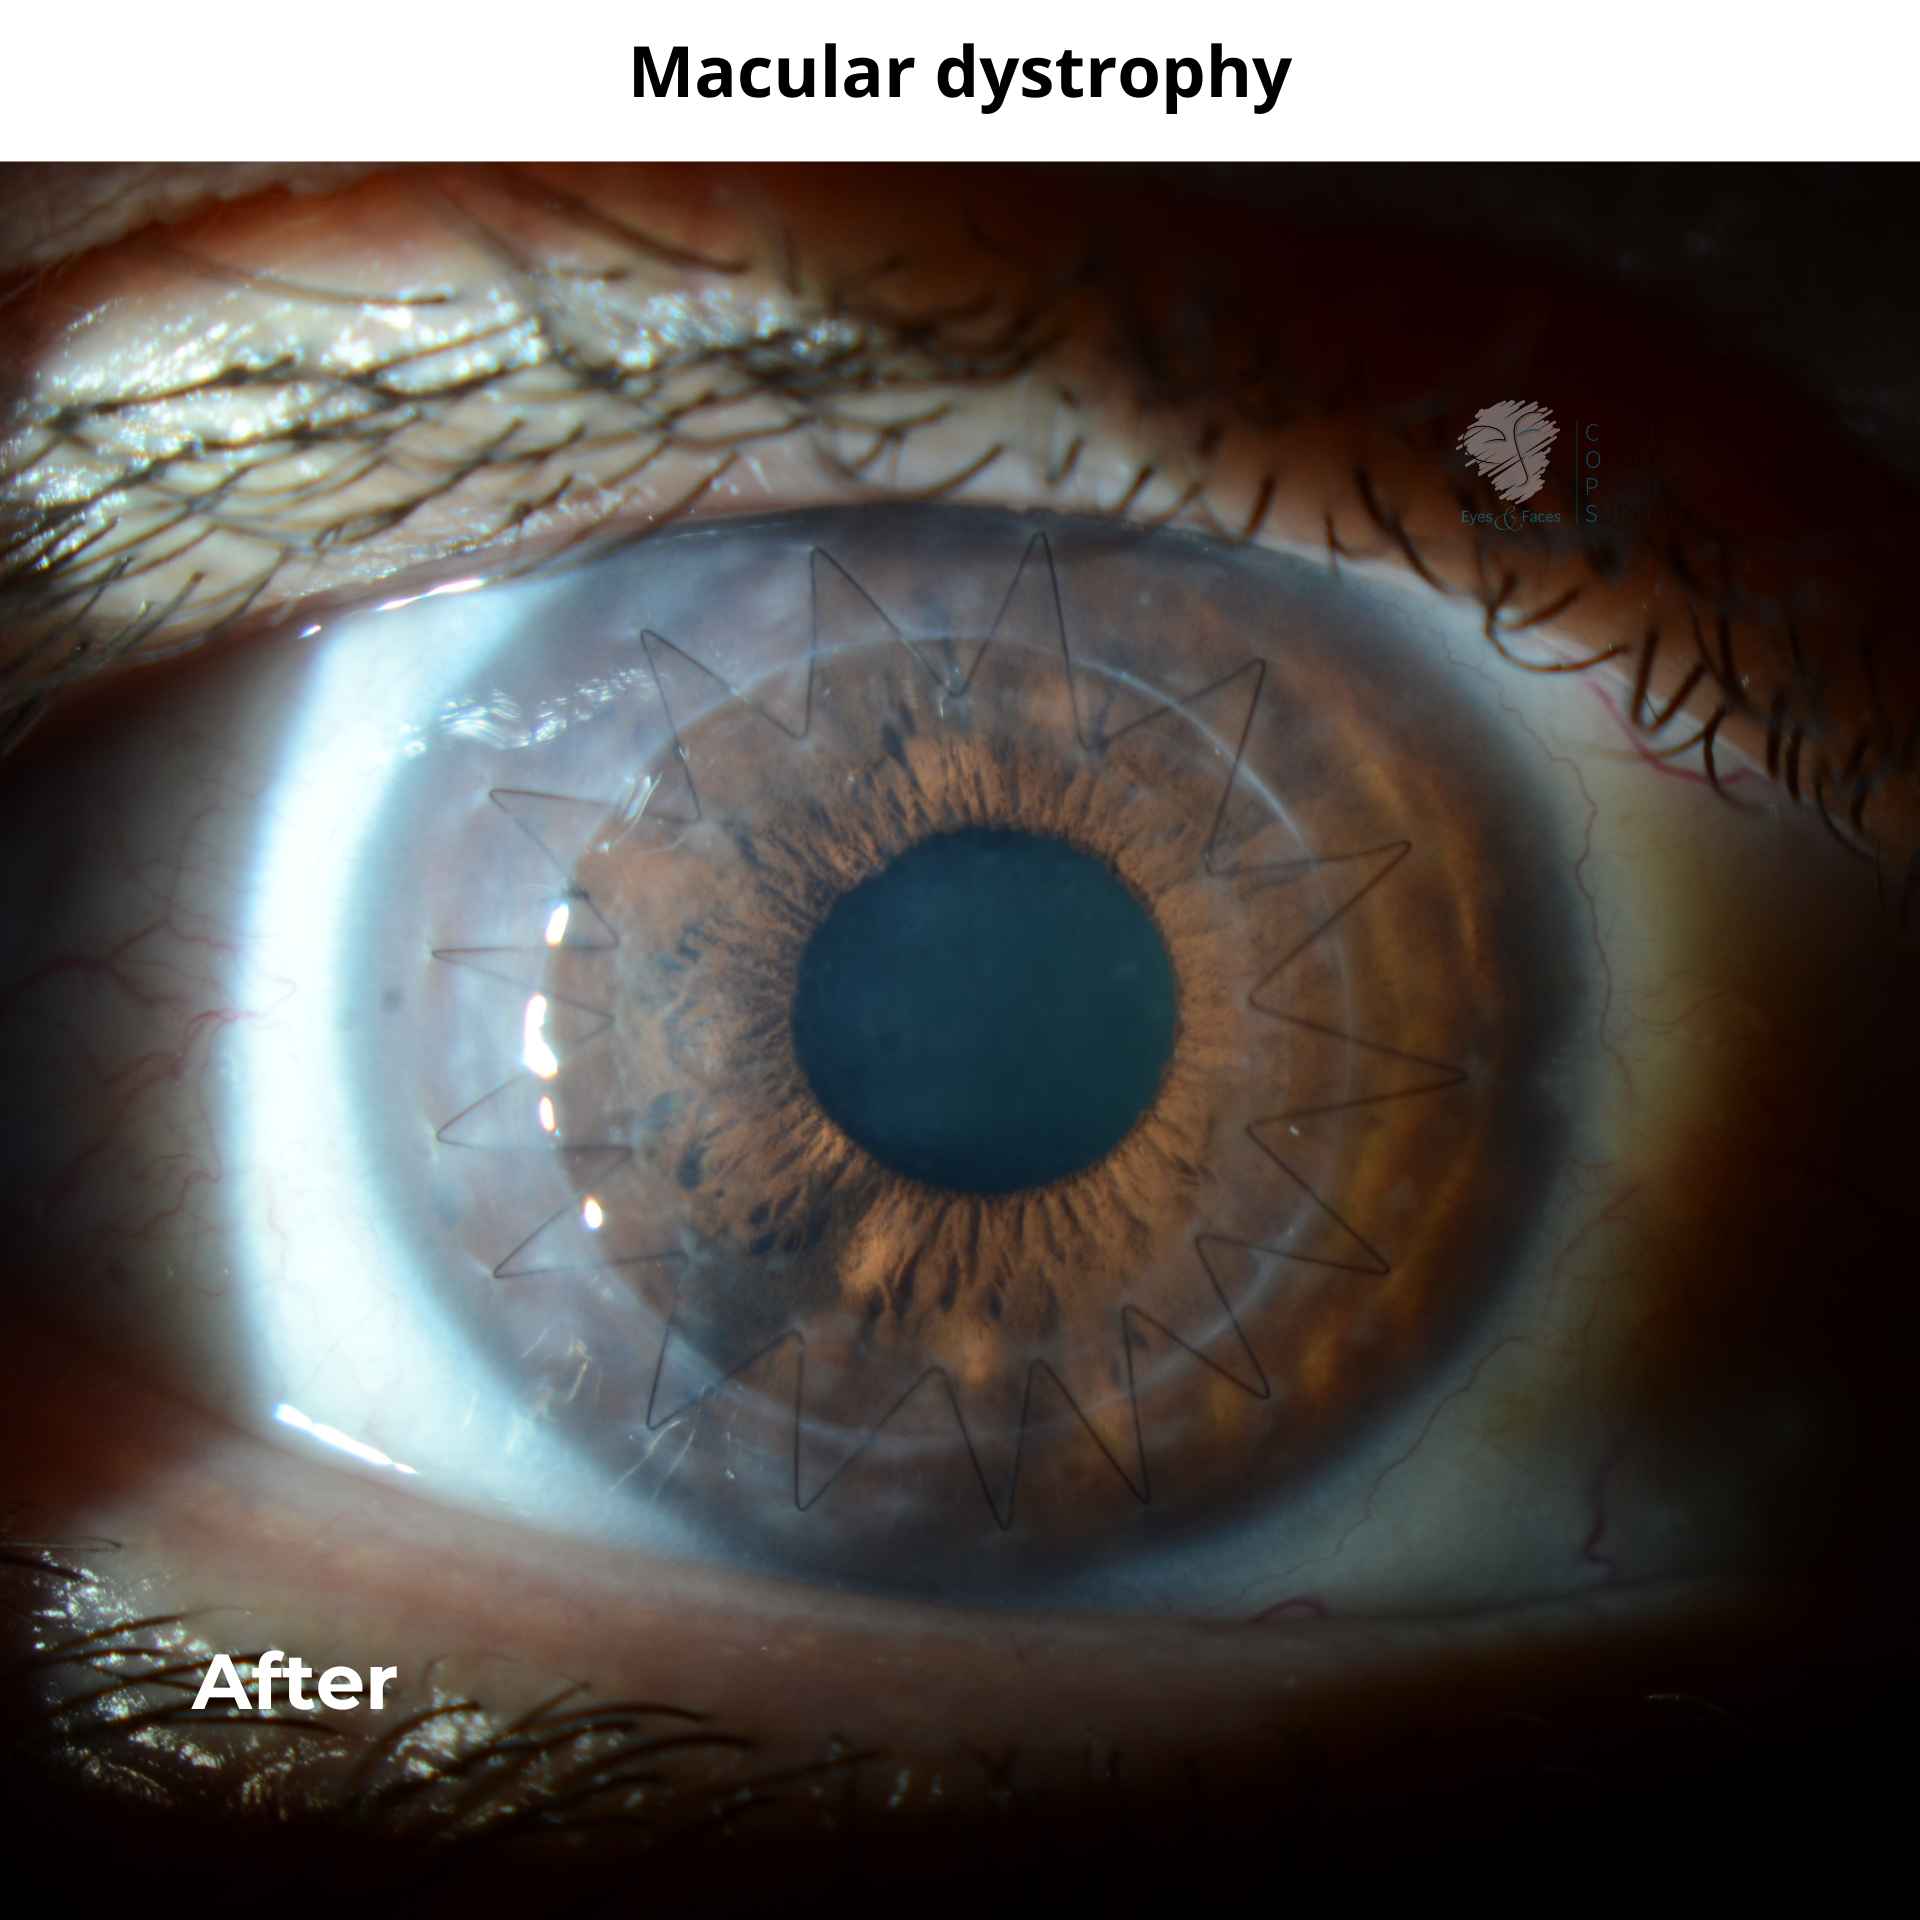 Corneal transplant to rectify macular dystrophy. Dr Anthony Maloof, Sydney performed the surgery.